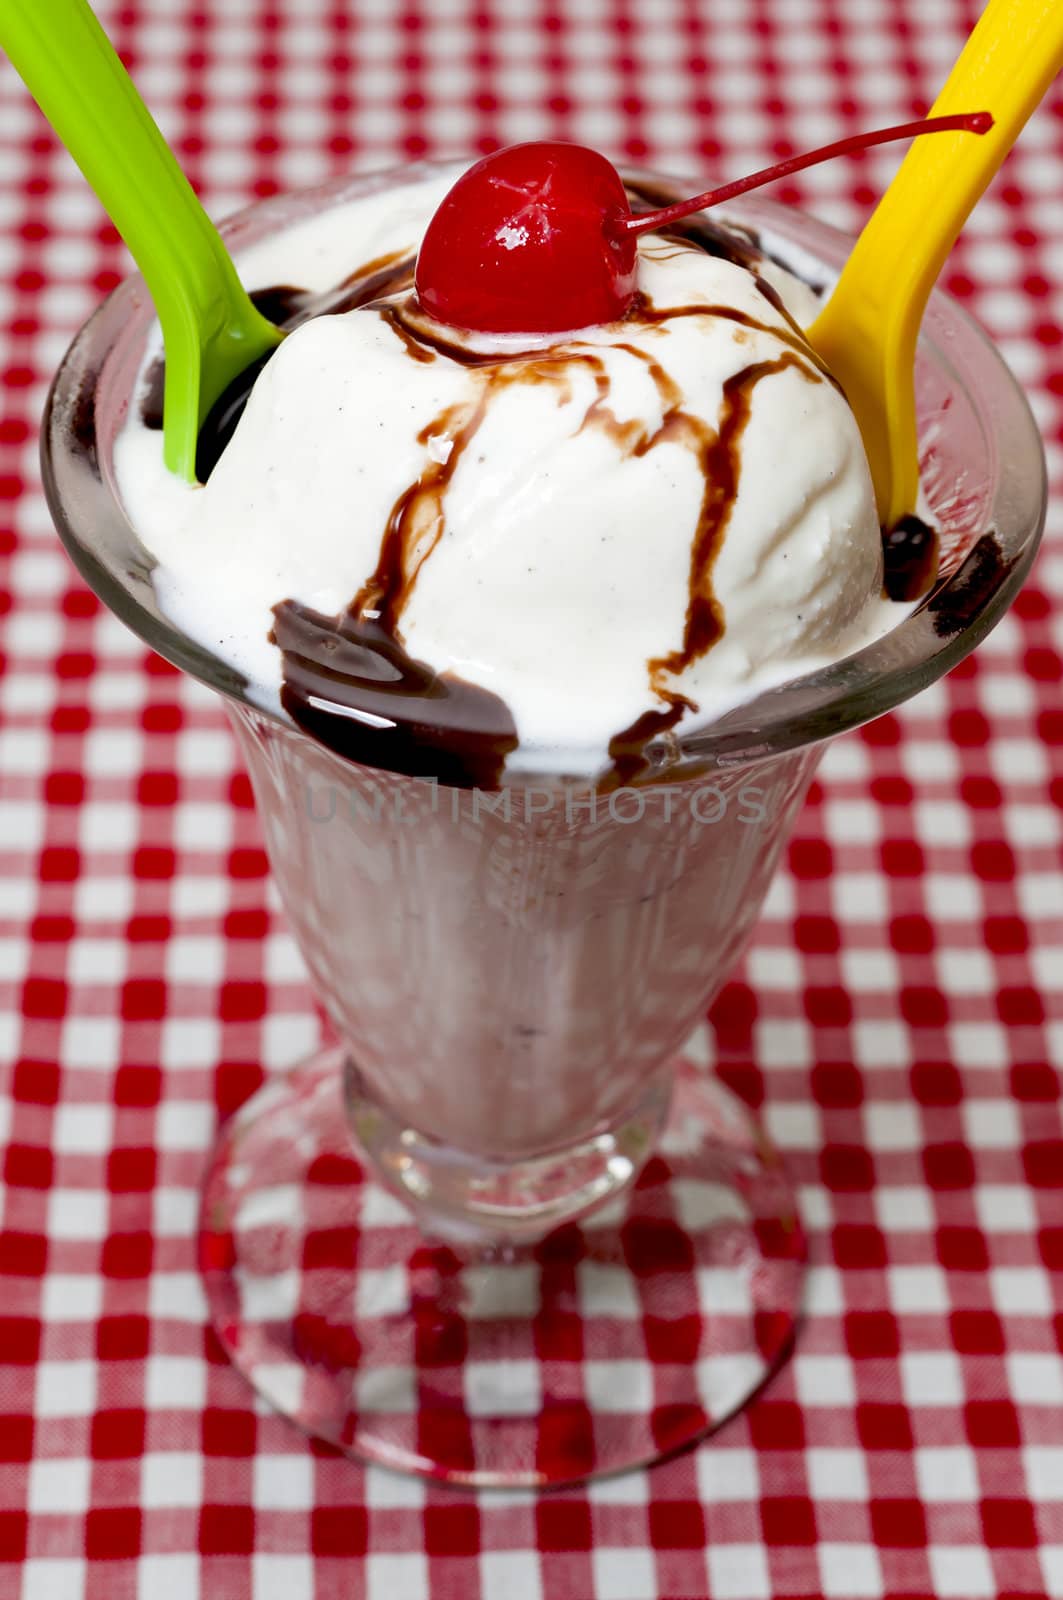 Vanilla Ice Cream and Spoons with Cherry and Chocolate Topping by dehooks